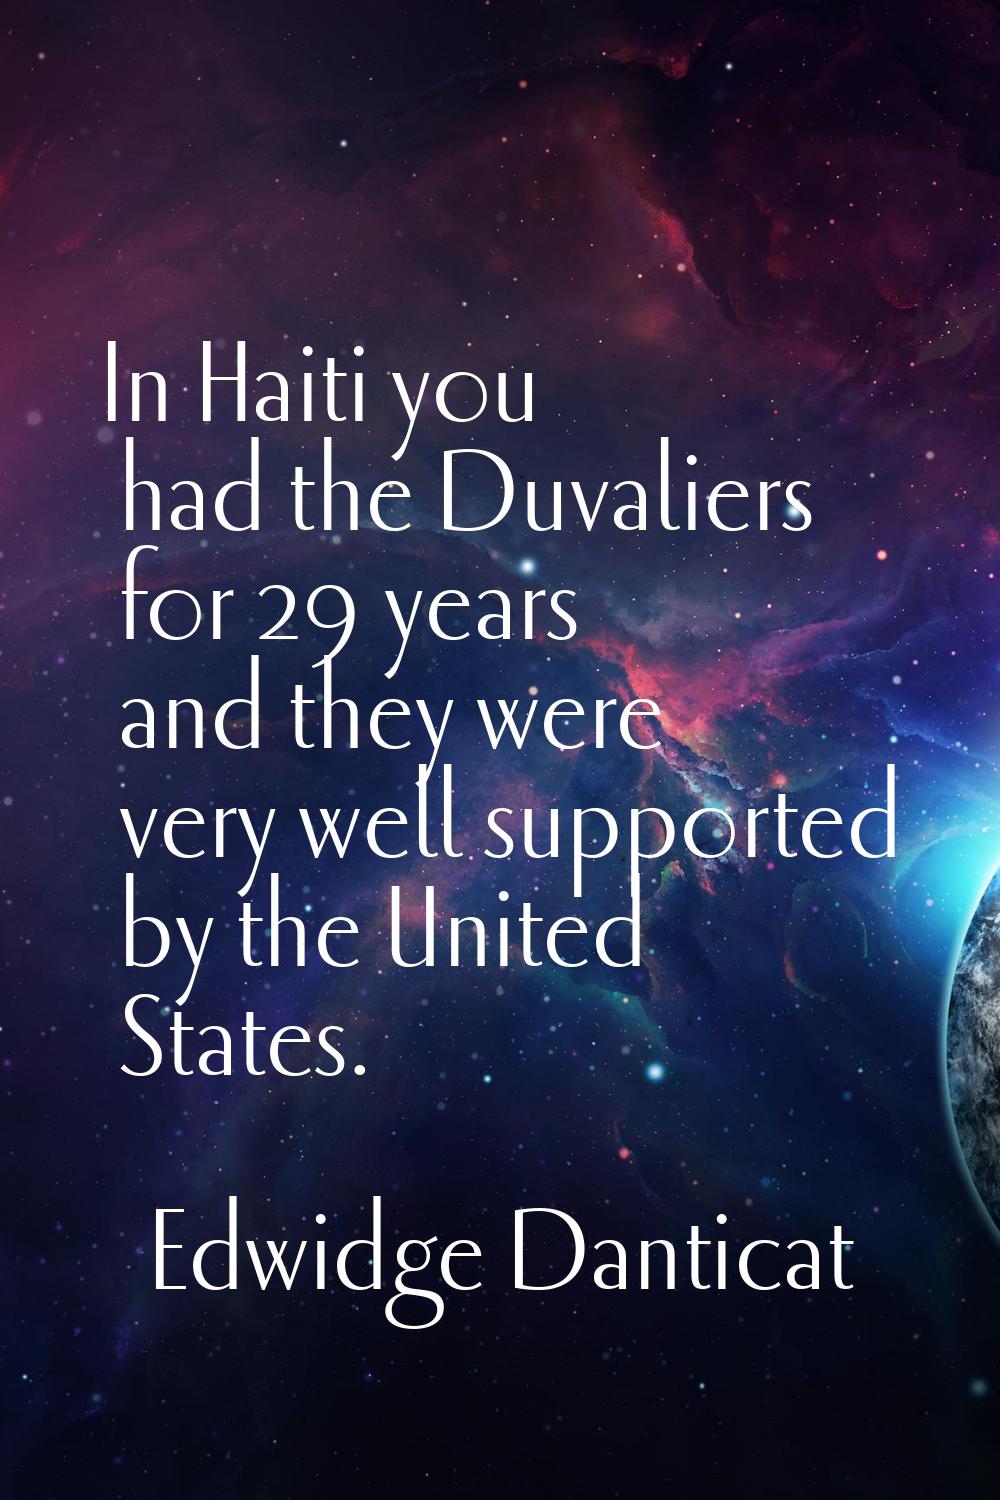 In Haiti you had the Duvaliers for 29 years and they were very well supported by the United States.